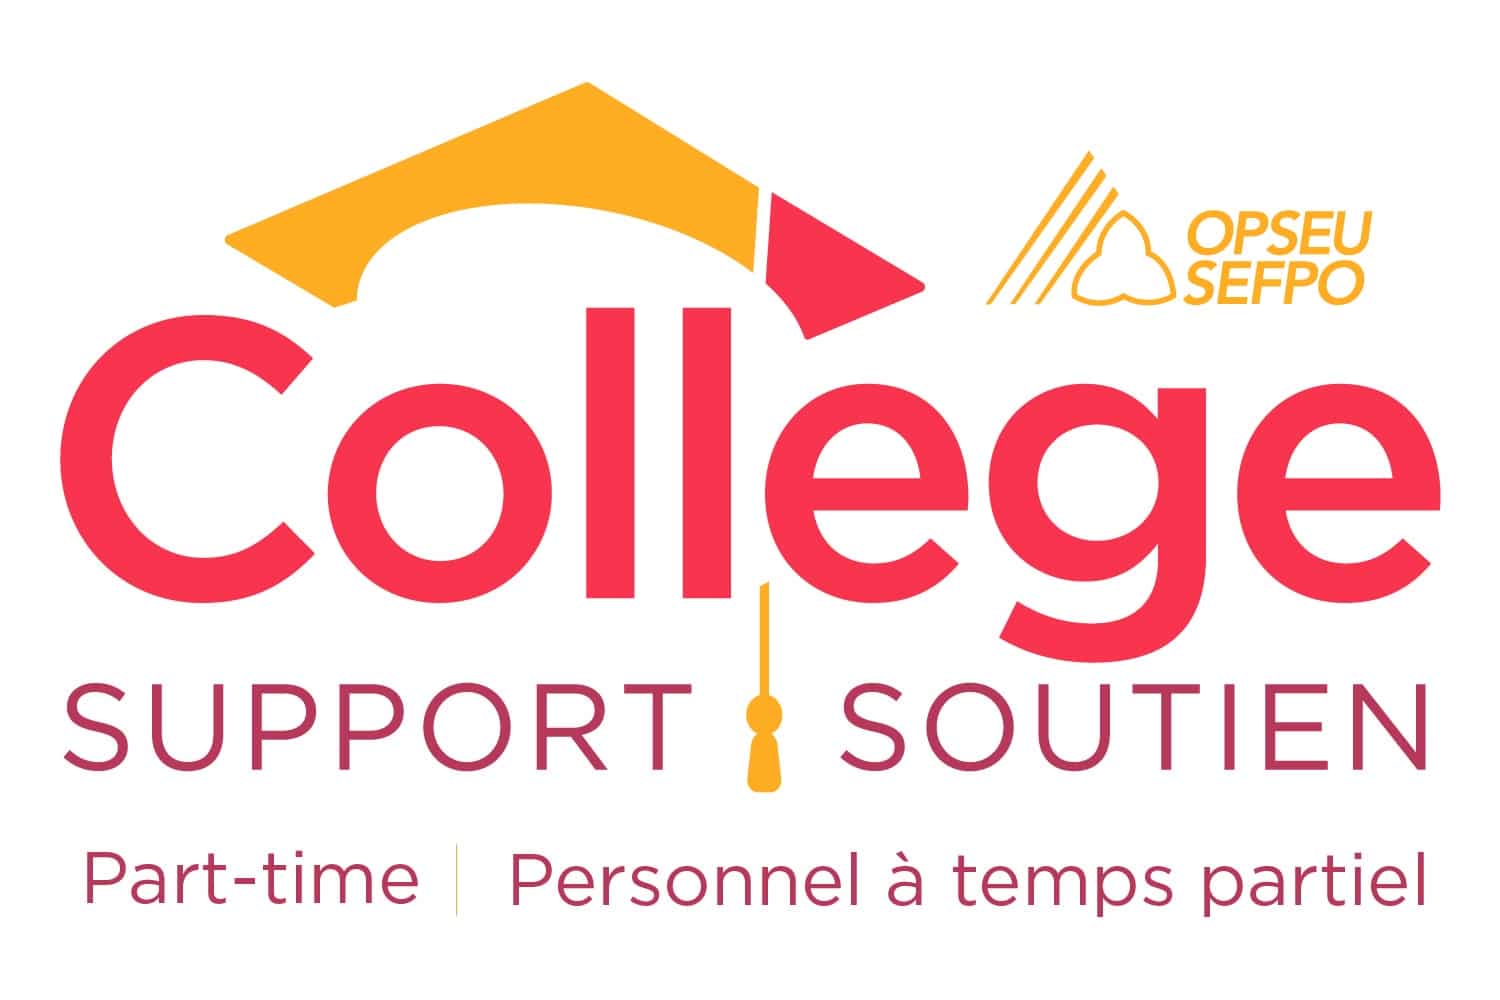 College Support part-time